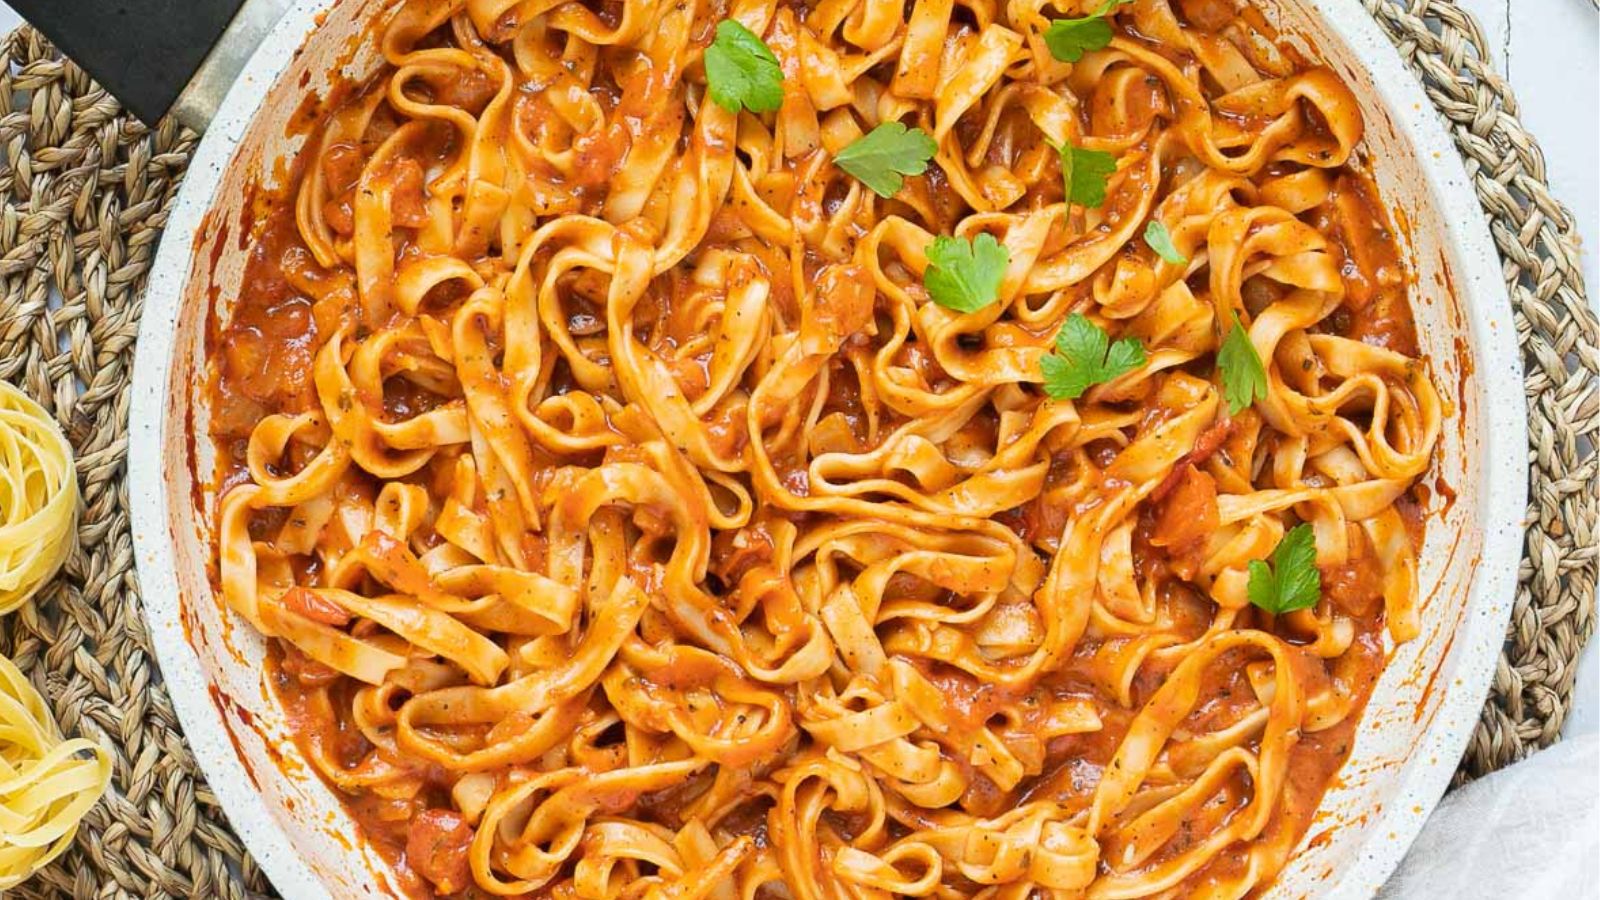 22 Easy Pasta Recipes For Quick Midweek Dinners